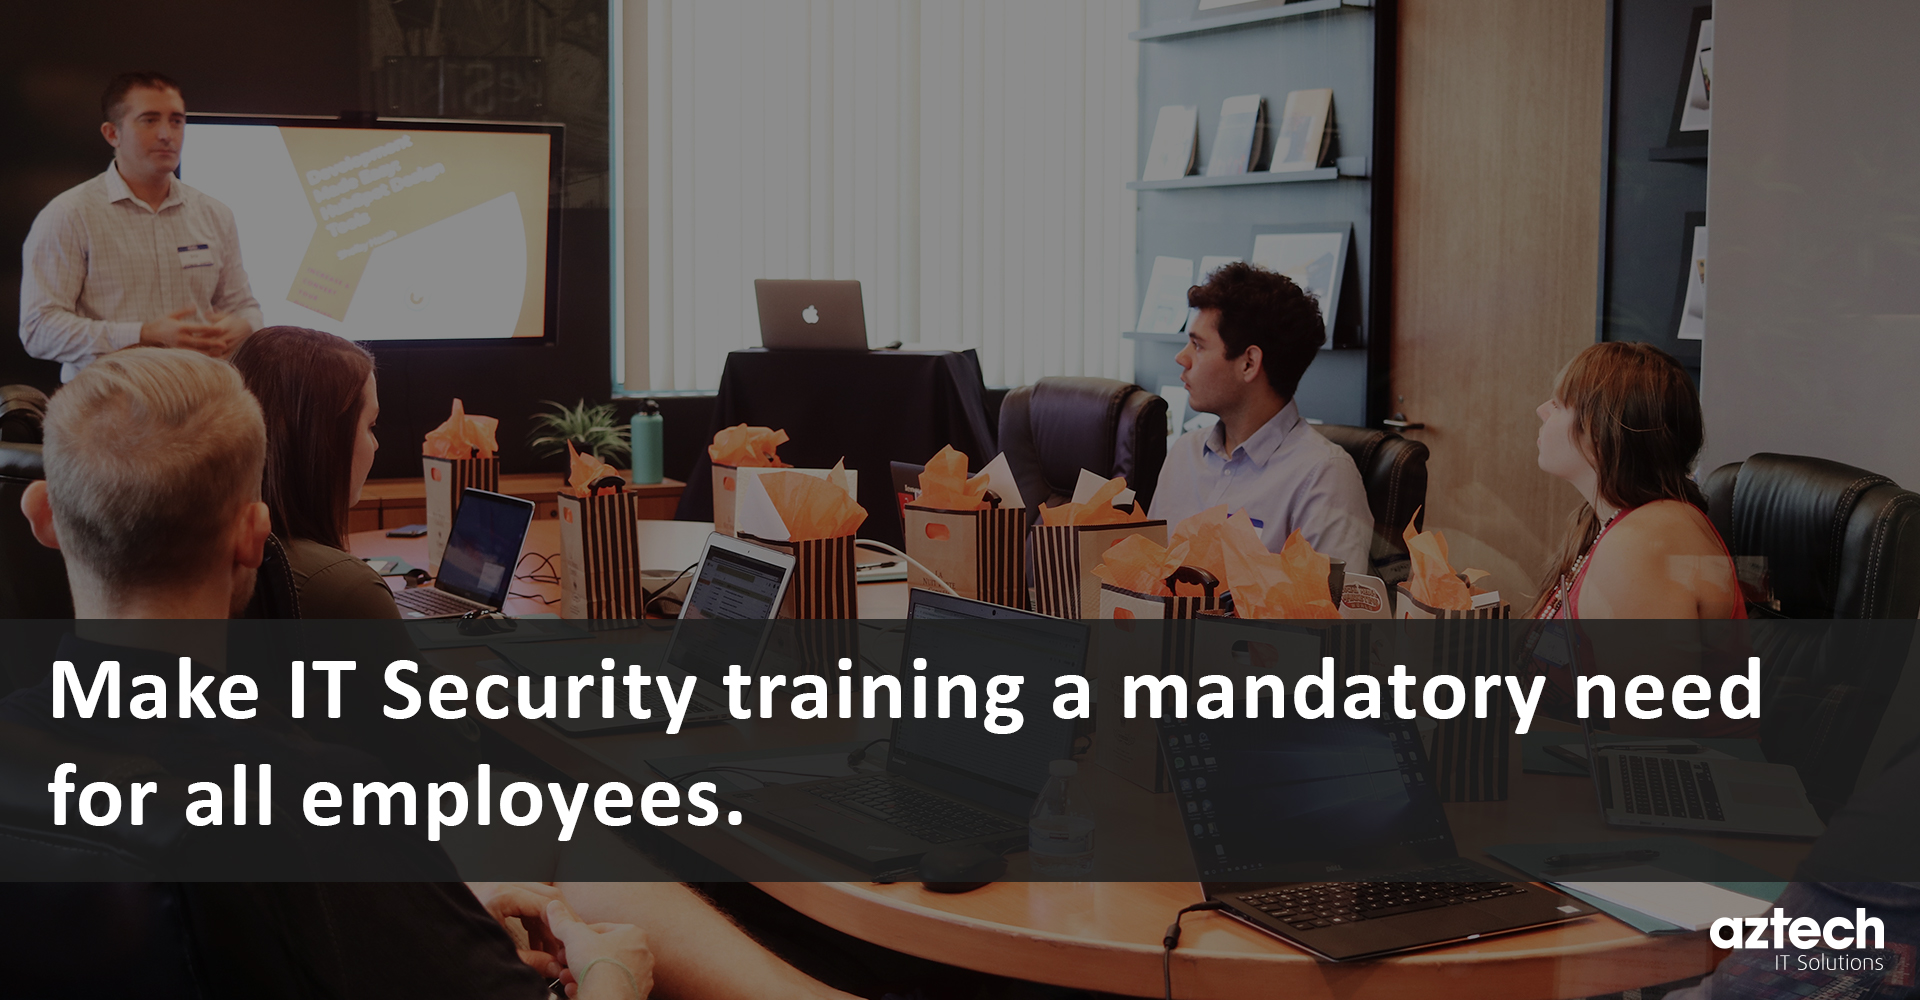 Employees receiving It security training